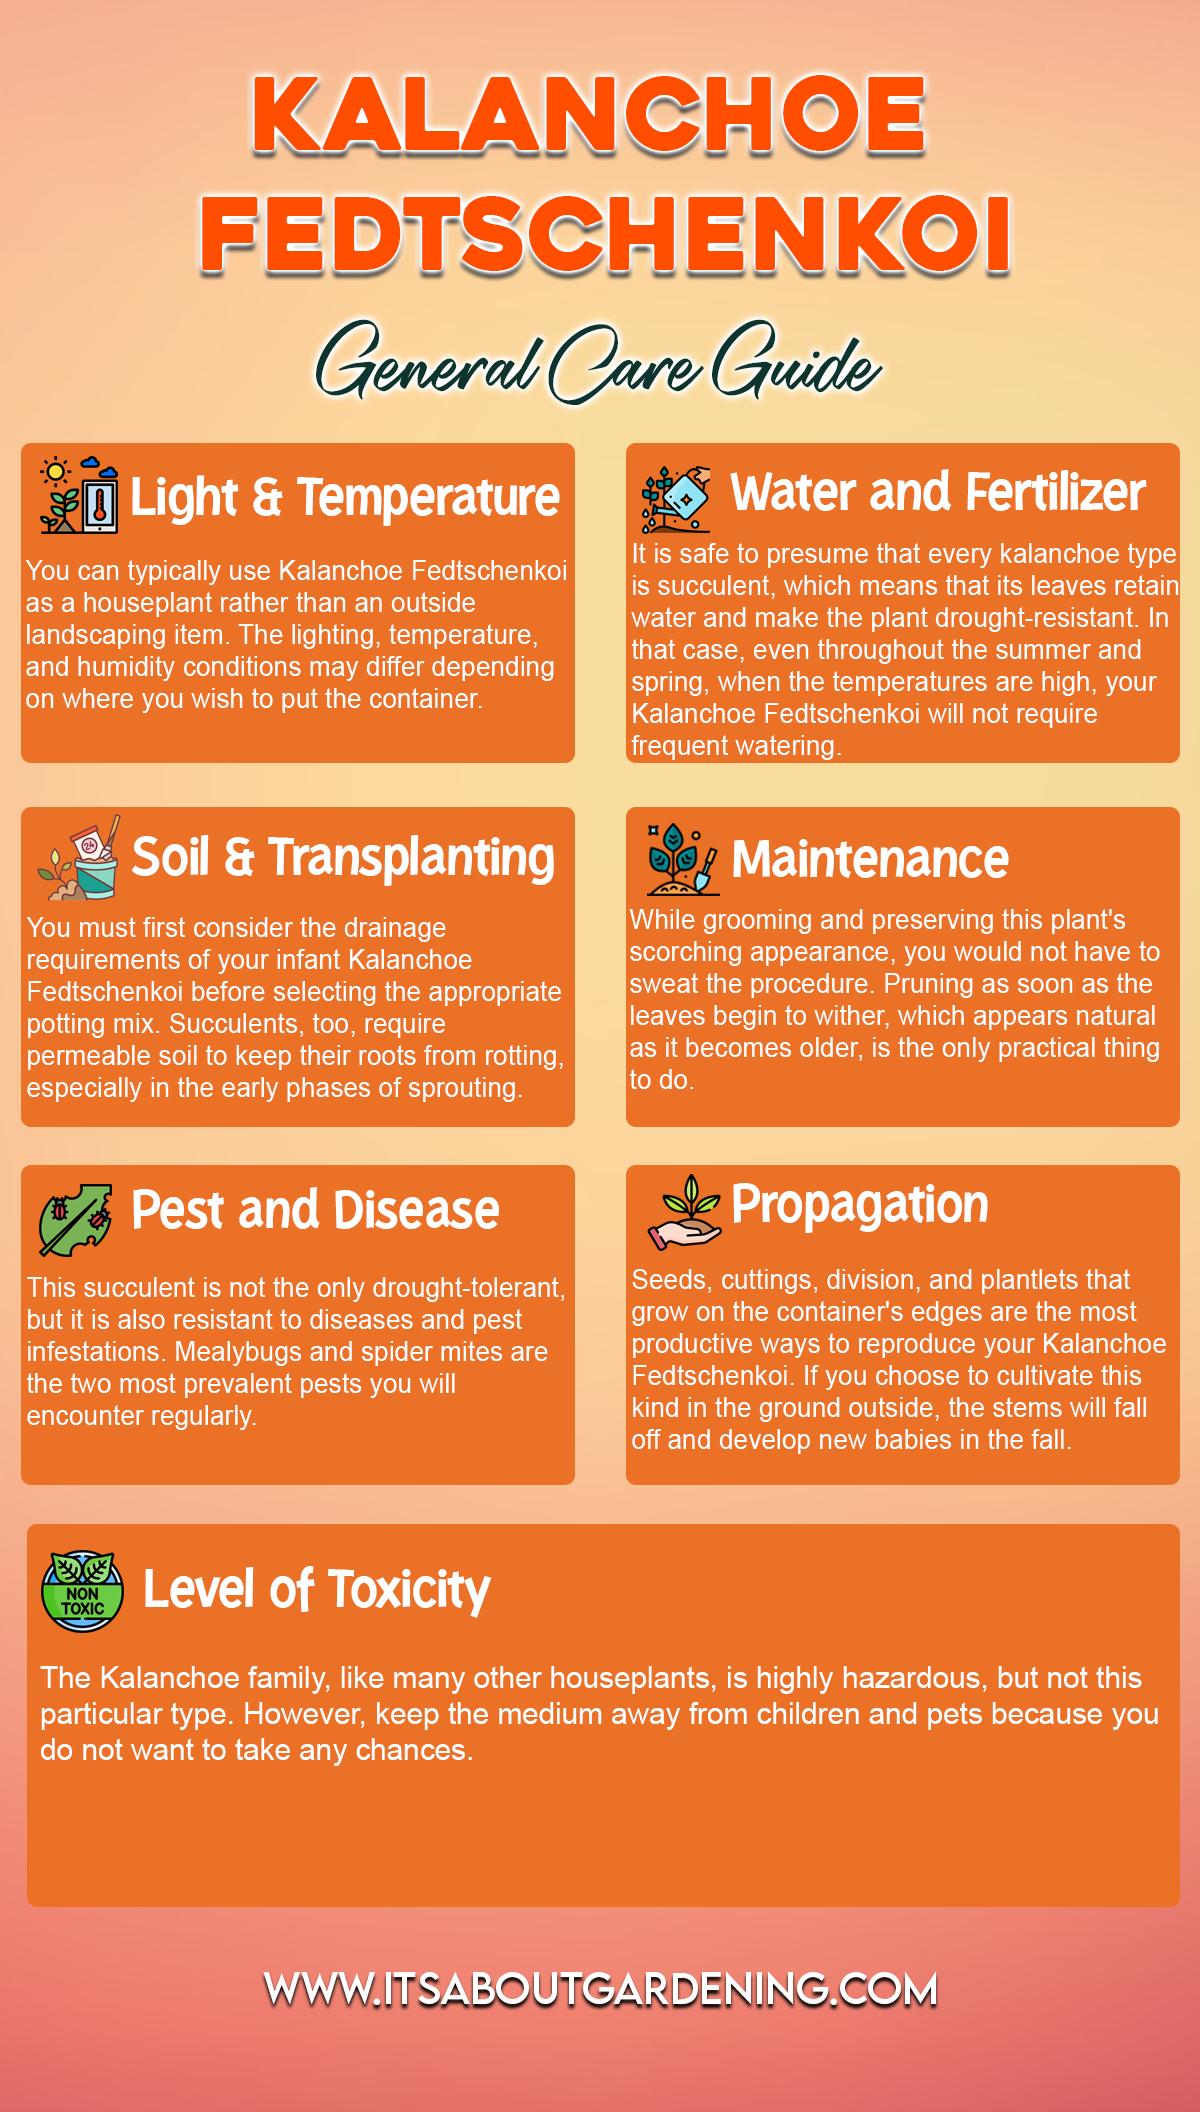 Kalanchoe Fedtschenkoi General Care Guide Infographic